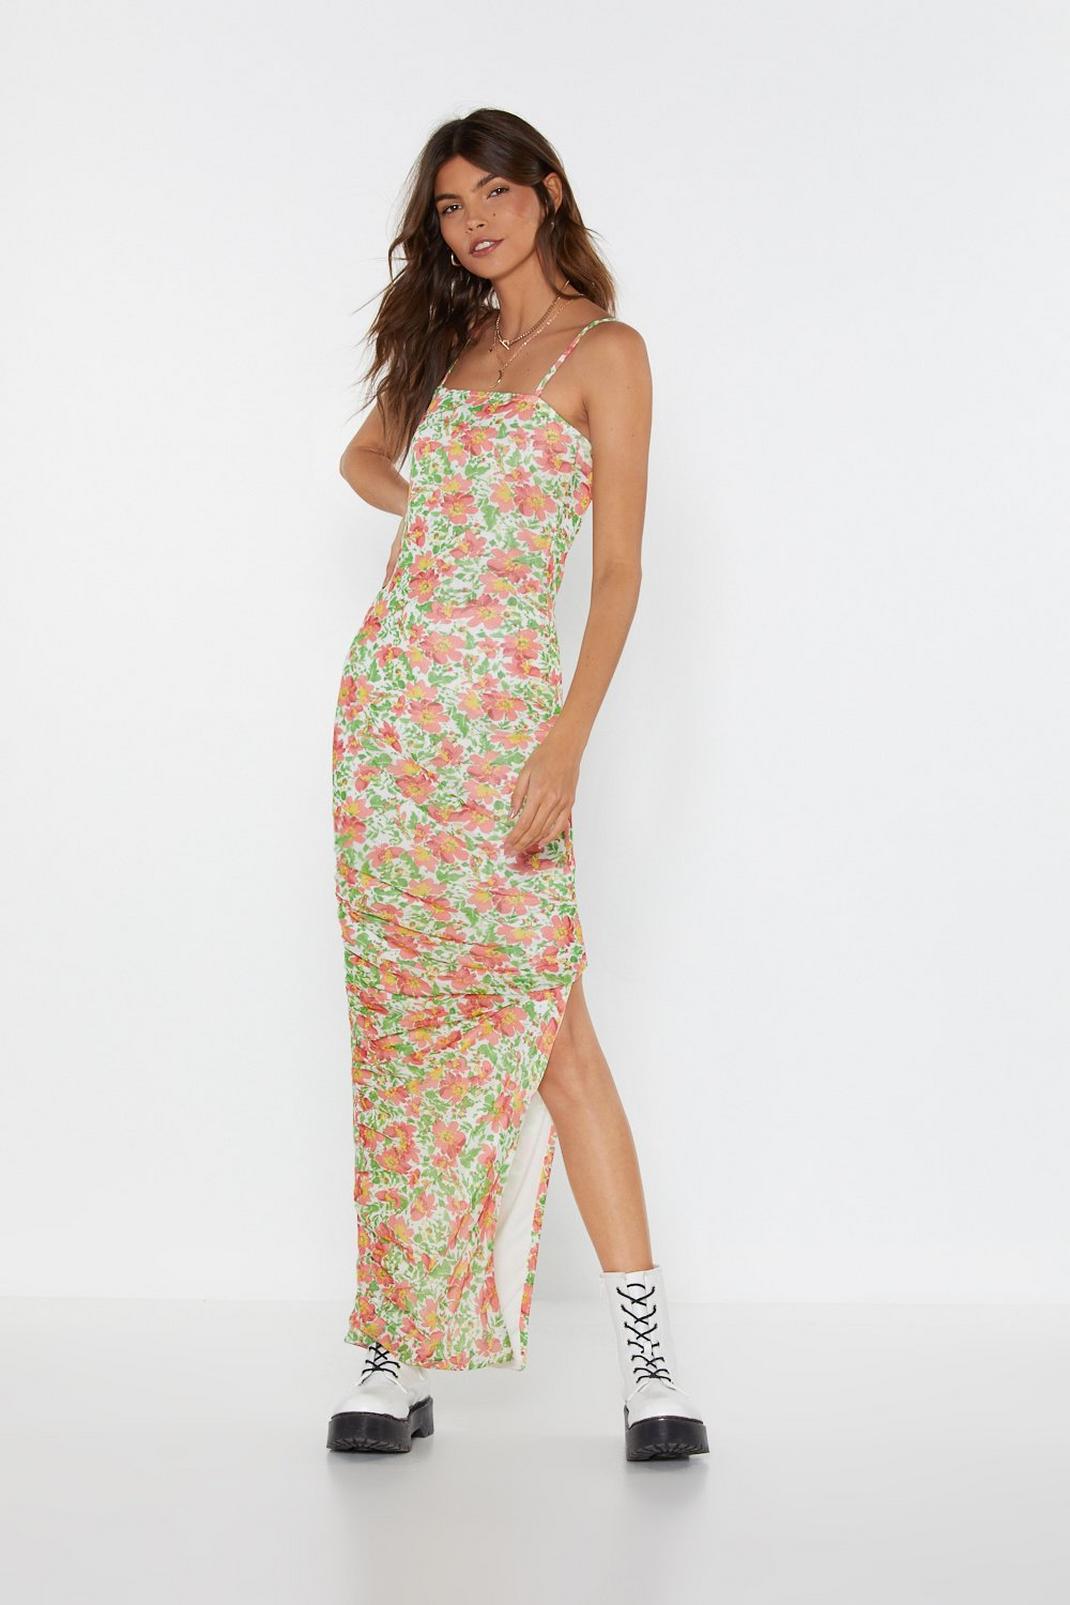 Be-leaf in Yourself Floral Maxi Dress image number 1